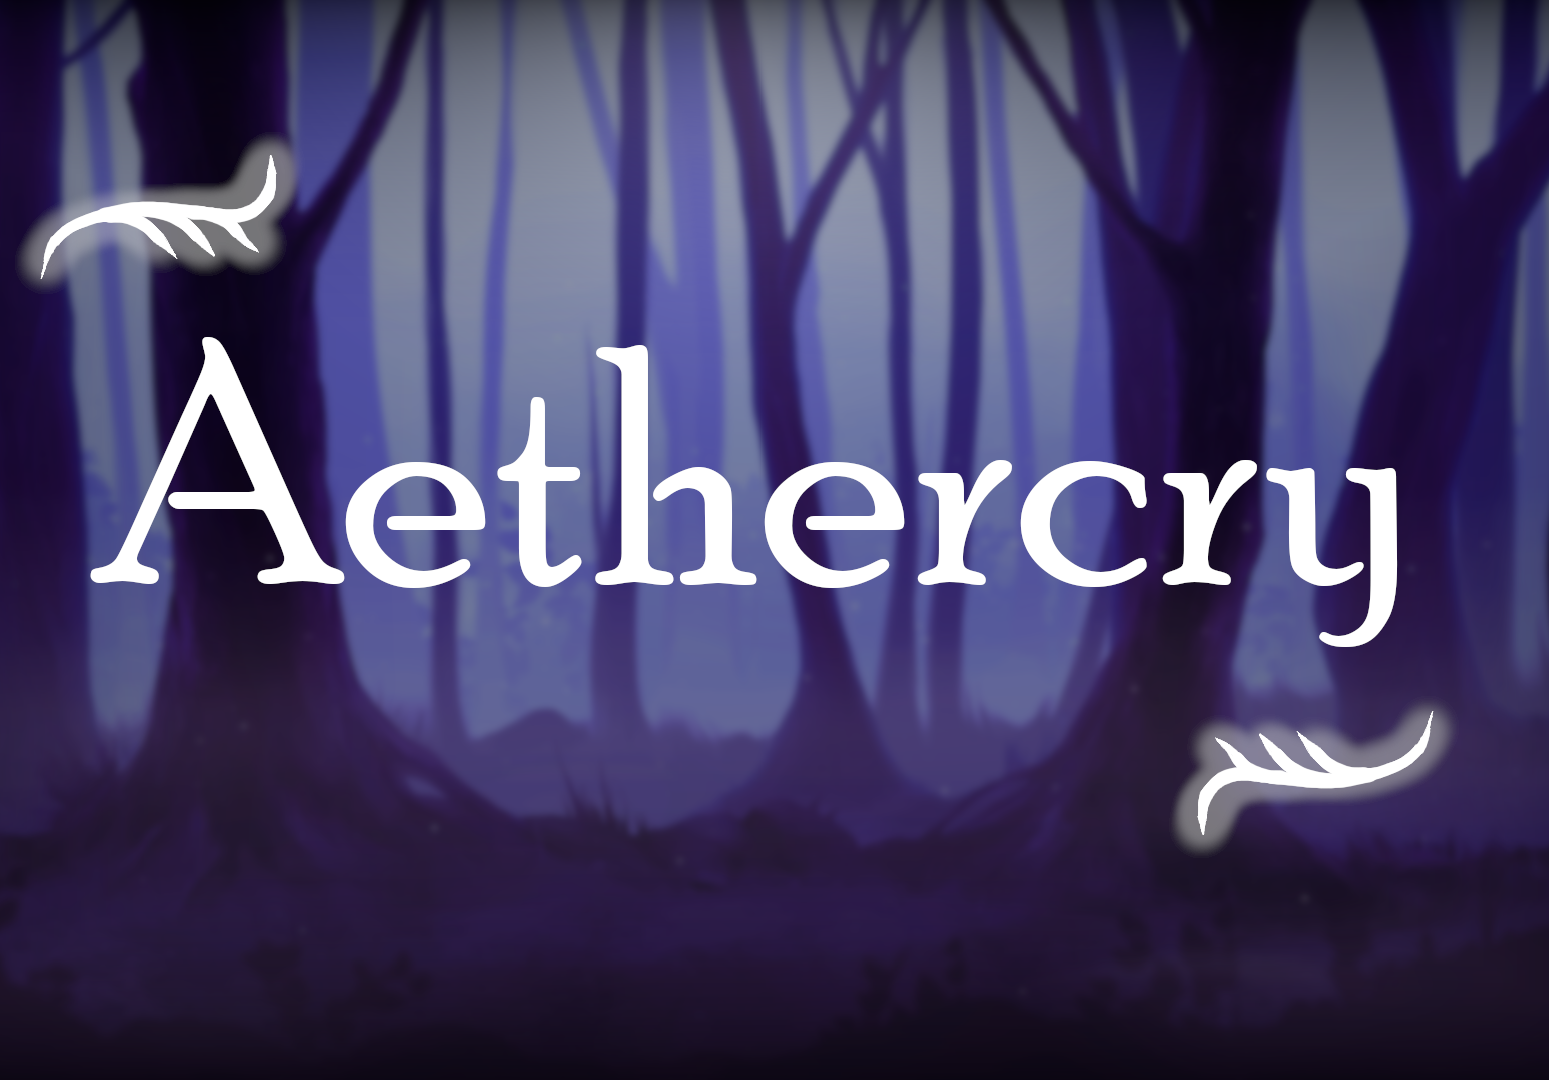 Aethercry